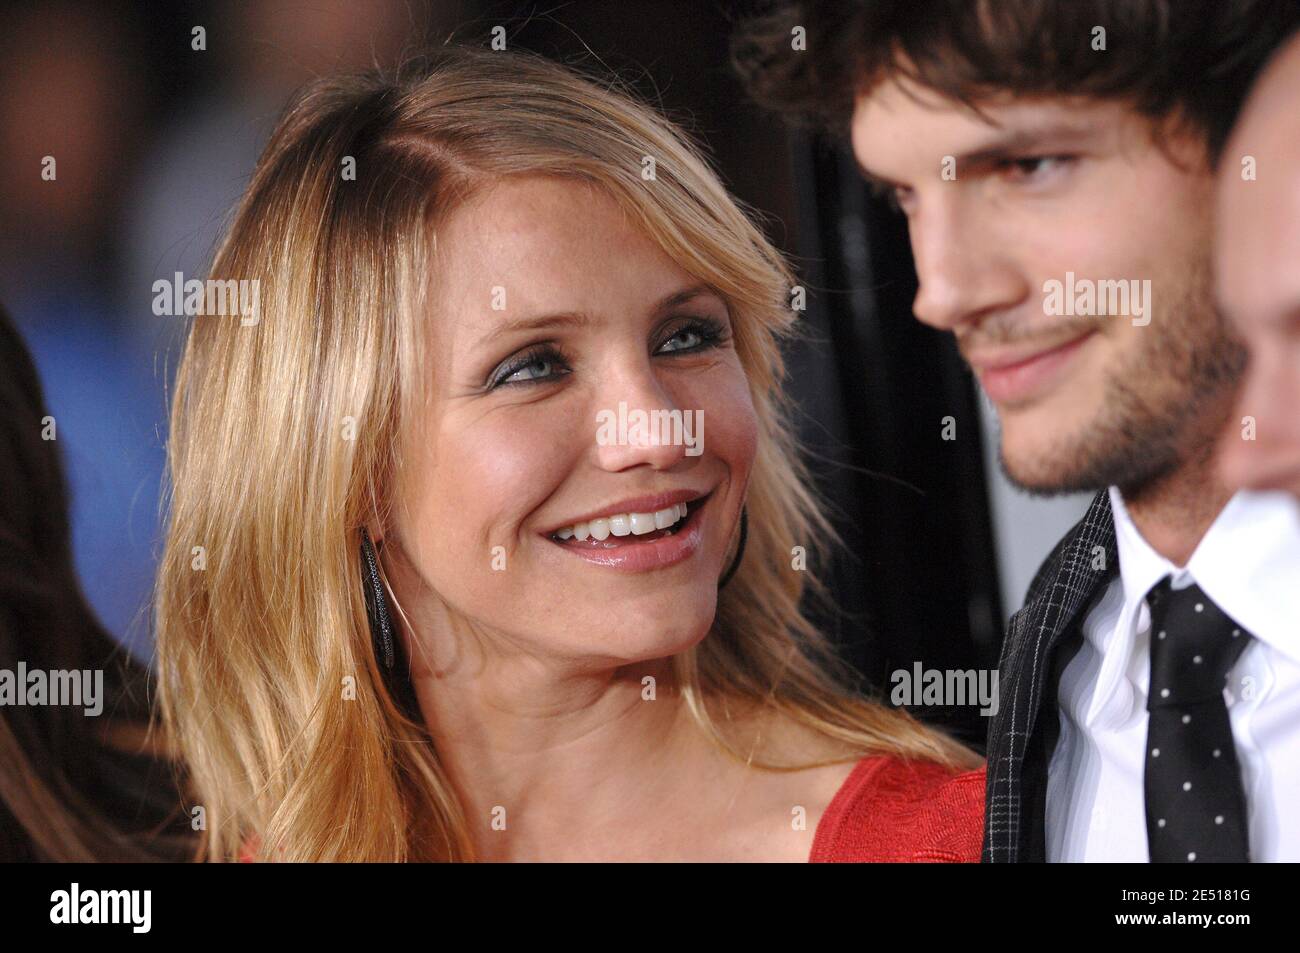 Cameron Diaz and Ashton Kutcher attend the premiere of 'What Happens In Vegas' at the Mann Village Theatre in Westwood. Los Angeles, May 1, 2008. Photo by Lionel Hahn/ABACAPRESS.COM Stock Photo